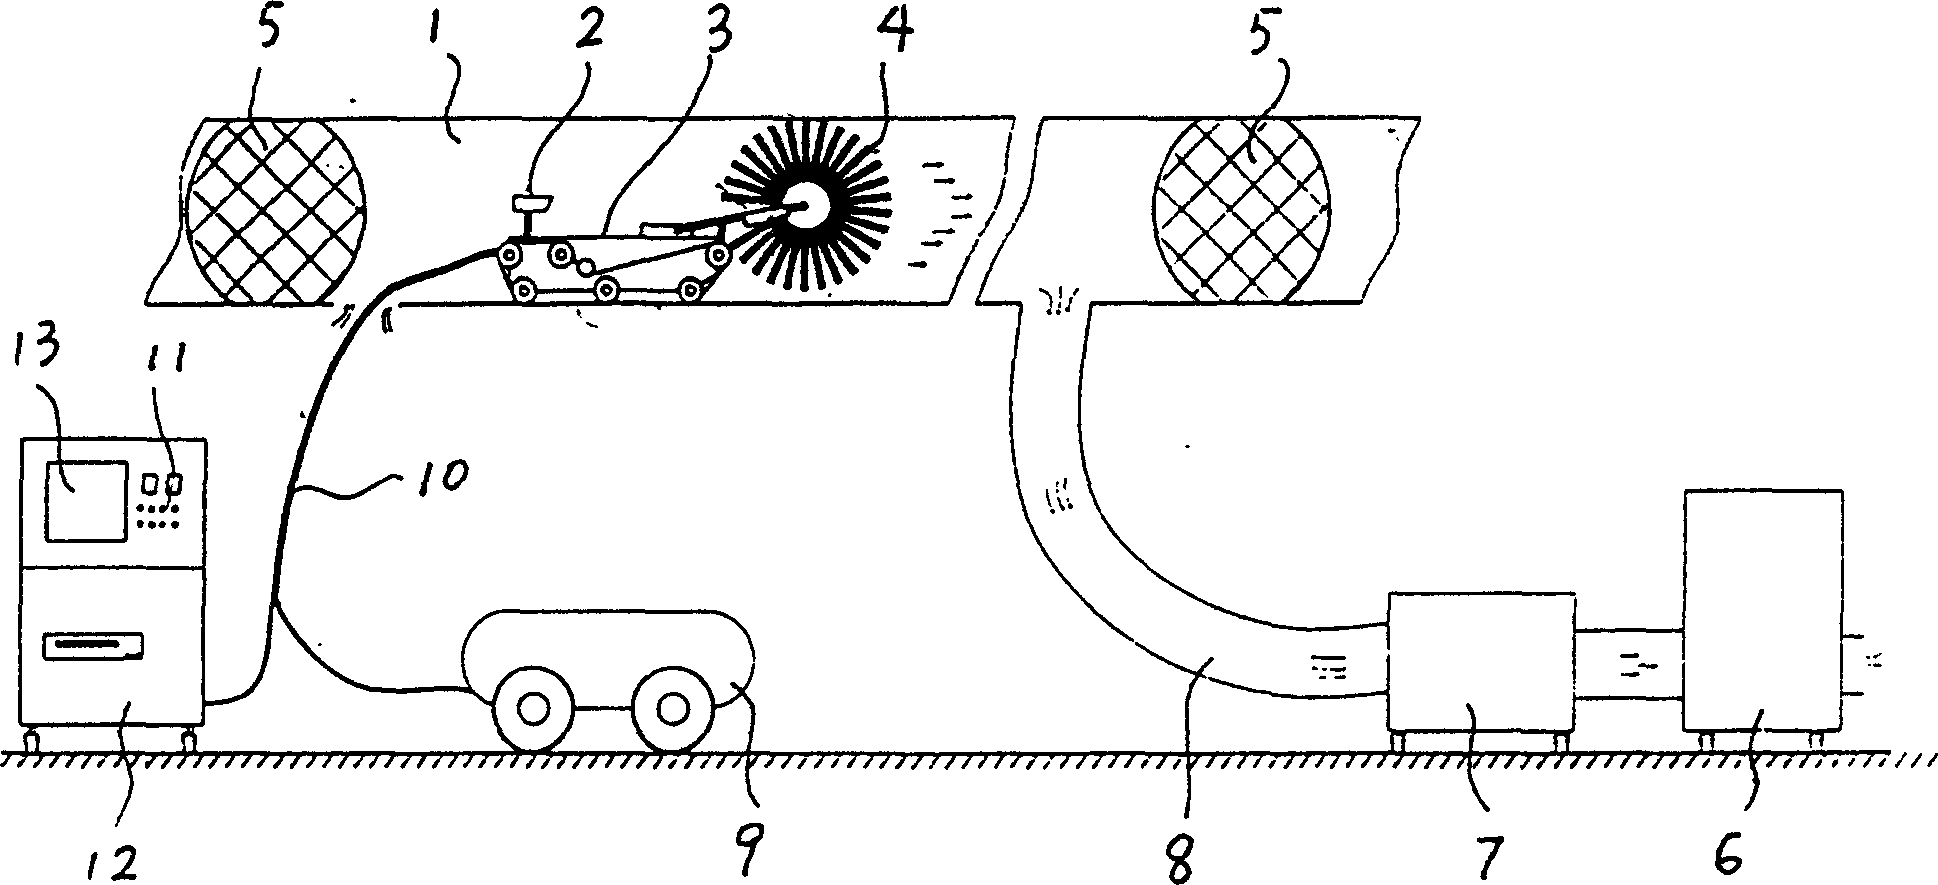 Device for cleaning ventilating duct of central air conditioner